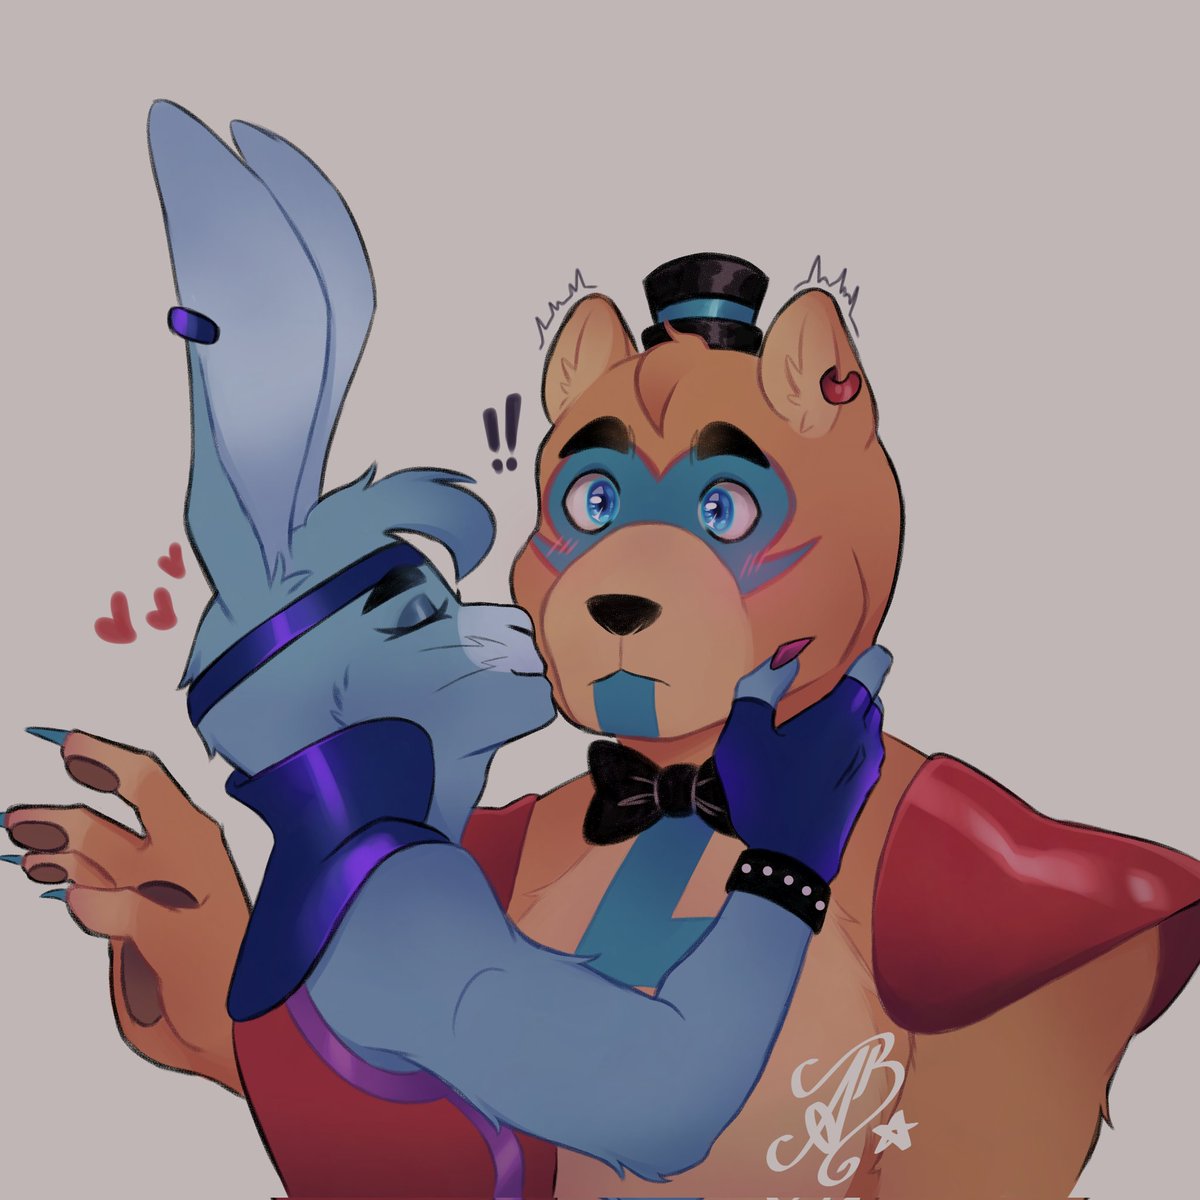 I finally have free time THANK GOD, i missed drawing sm, especially these two, i still have lots of unfinished sketches on my gallery.

DIOS SUÉLTAME NO SOY TU MEJOR GUERRERO

#Fronnie #FiveNightsAtFreeddys #FNAF #GlamrockBonnie #glamrockfreddy #glamrockfronnie #fnafsb #fnafruin